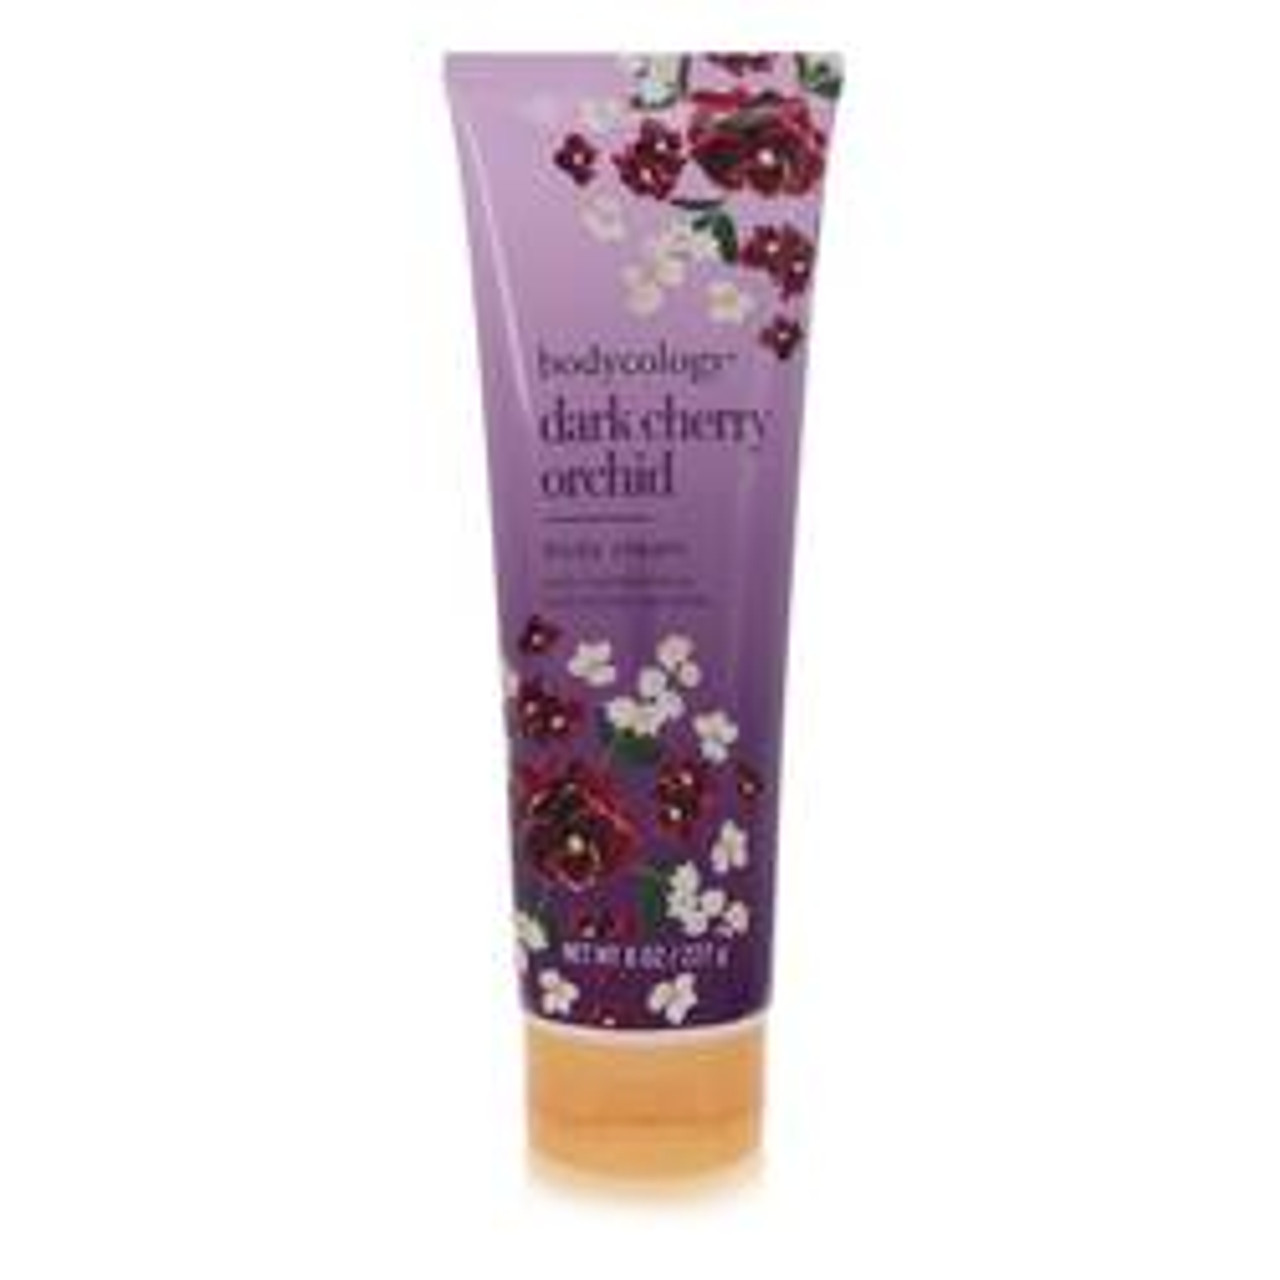 Bodycology Dark Cherry Orchid Perfume By Bodycology Body Cream 8 oz for Women - *Pre-Order